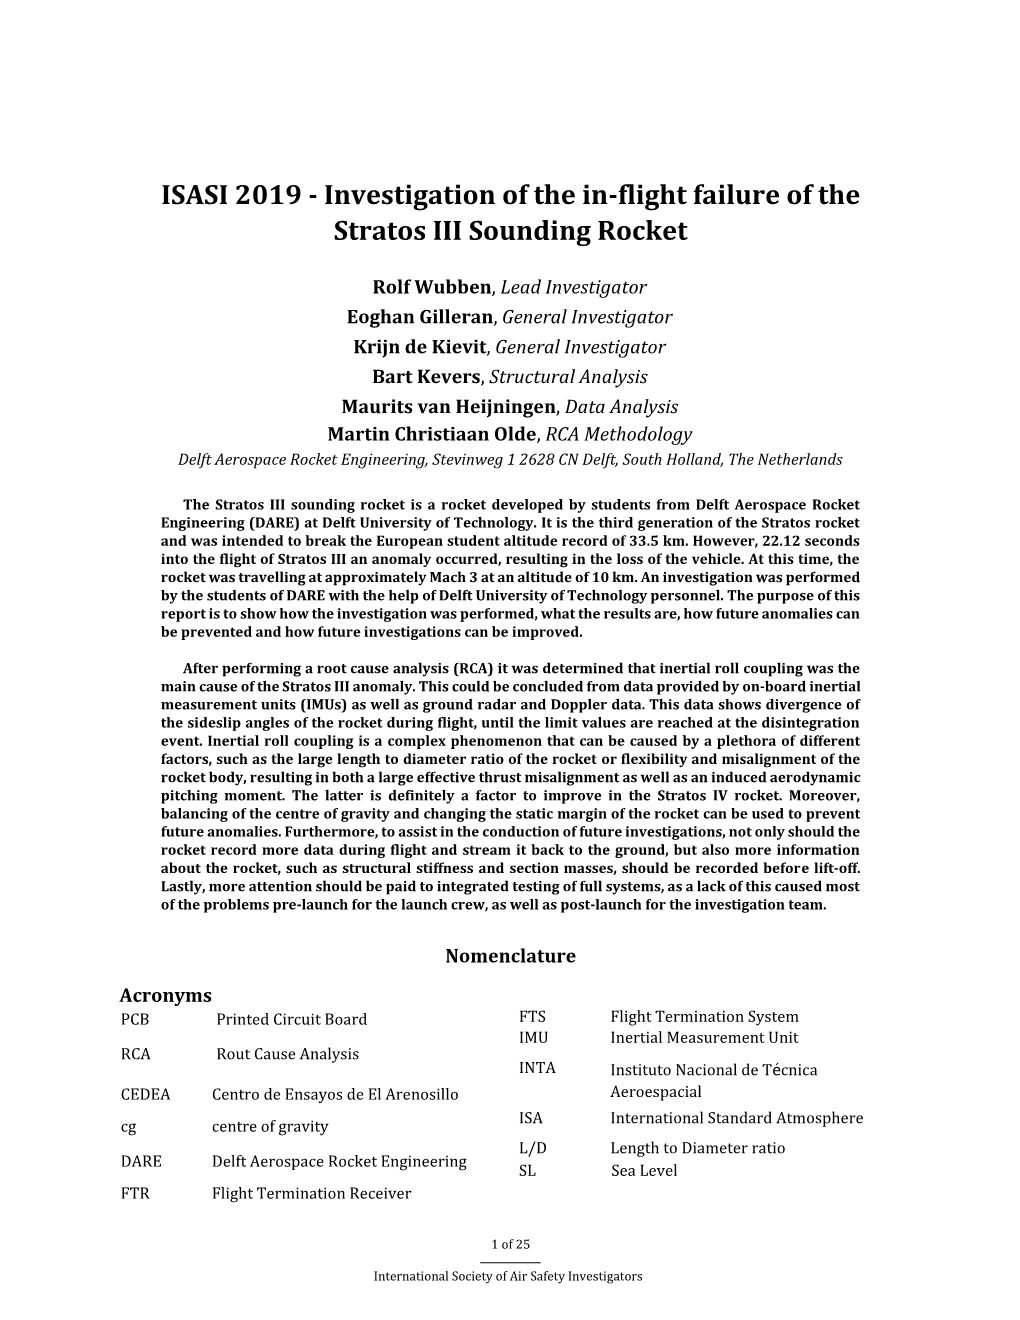 Investigation of the In-Flight Failure of the Stratos III Sounding Rocket